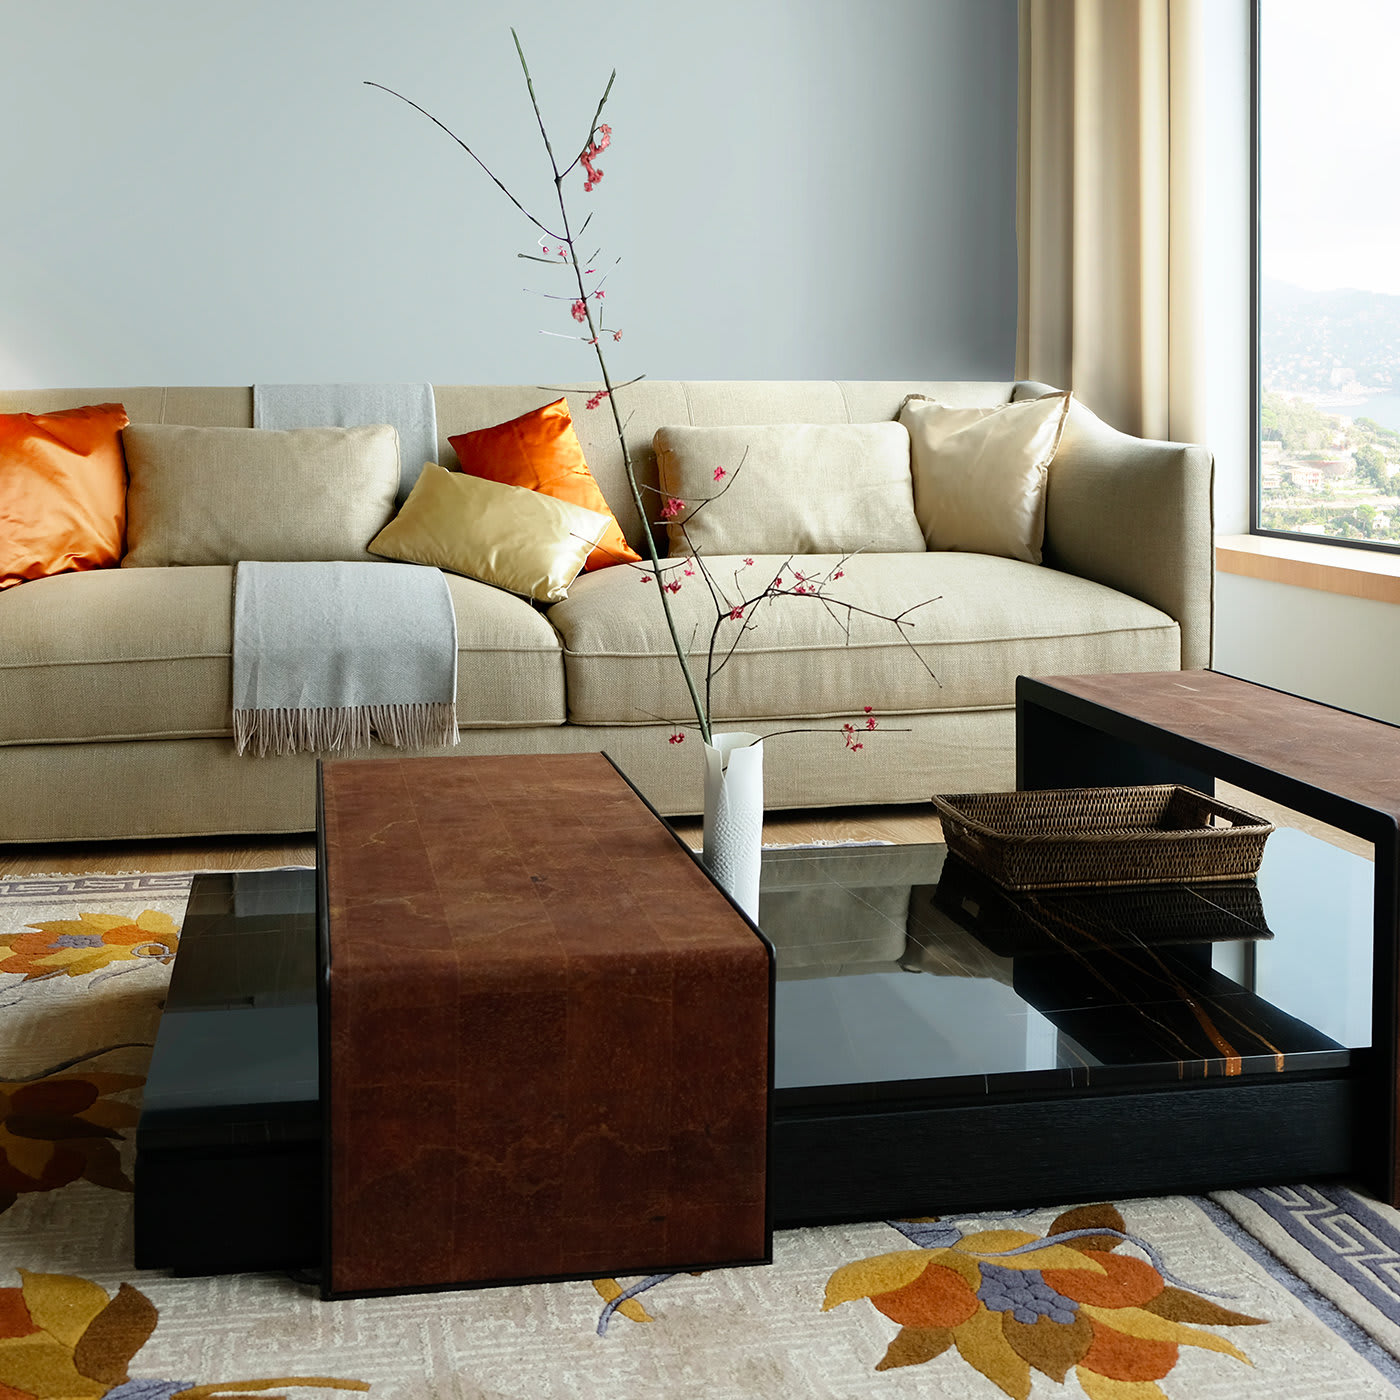 Appia Coffee Table - Garbarino Collections